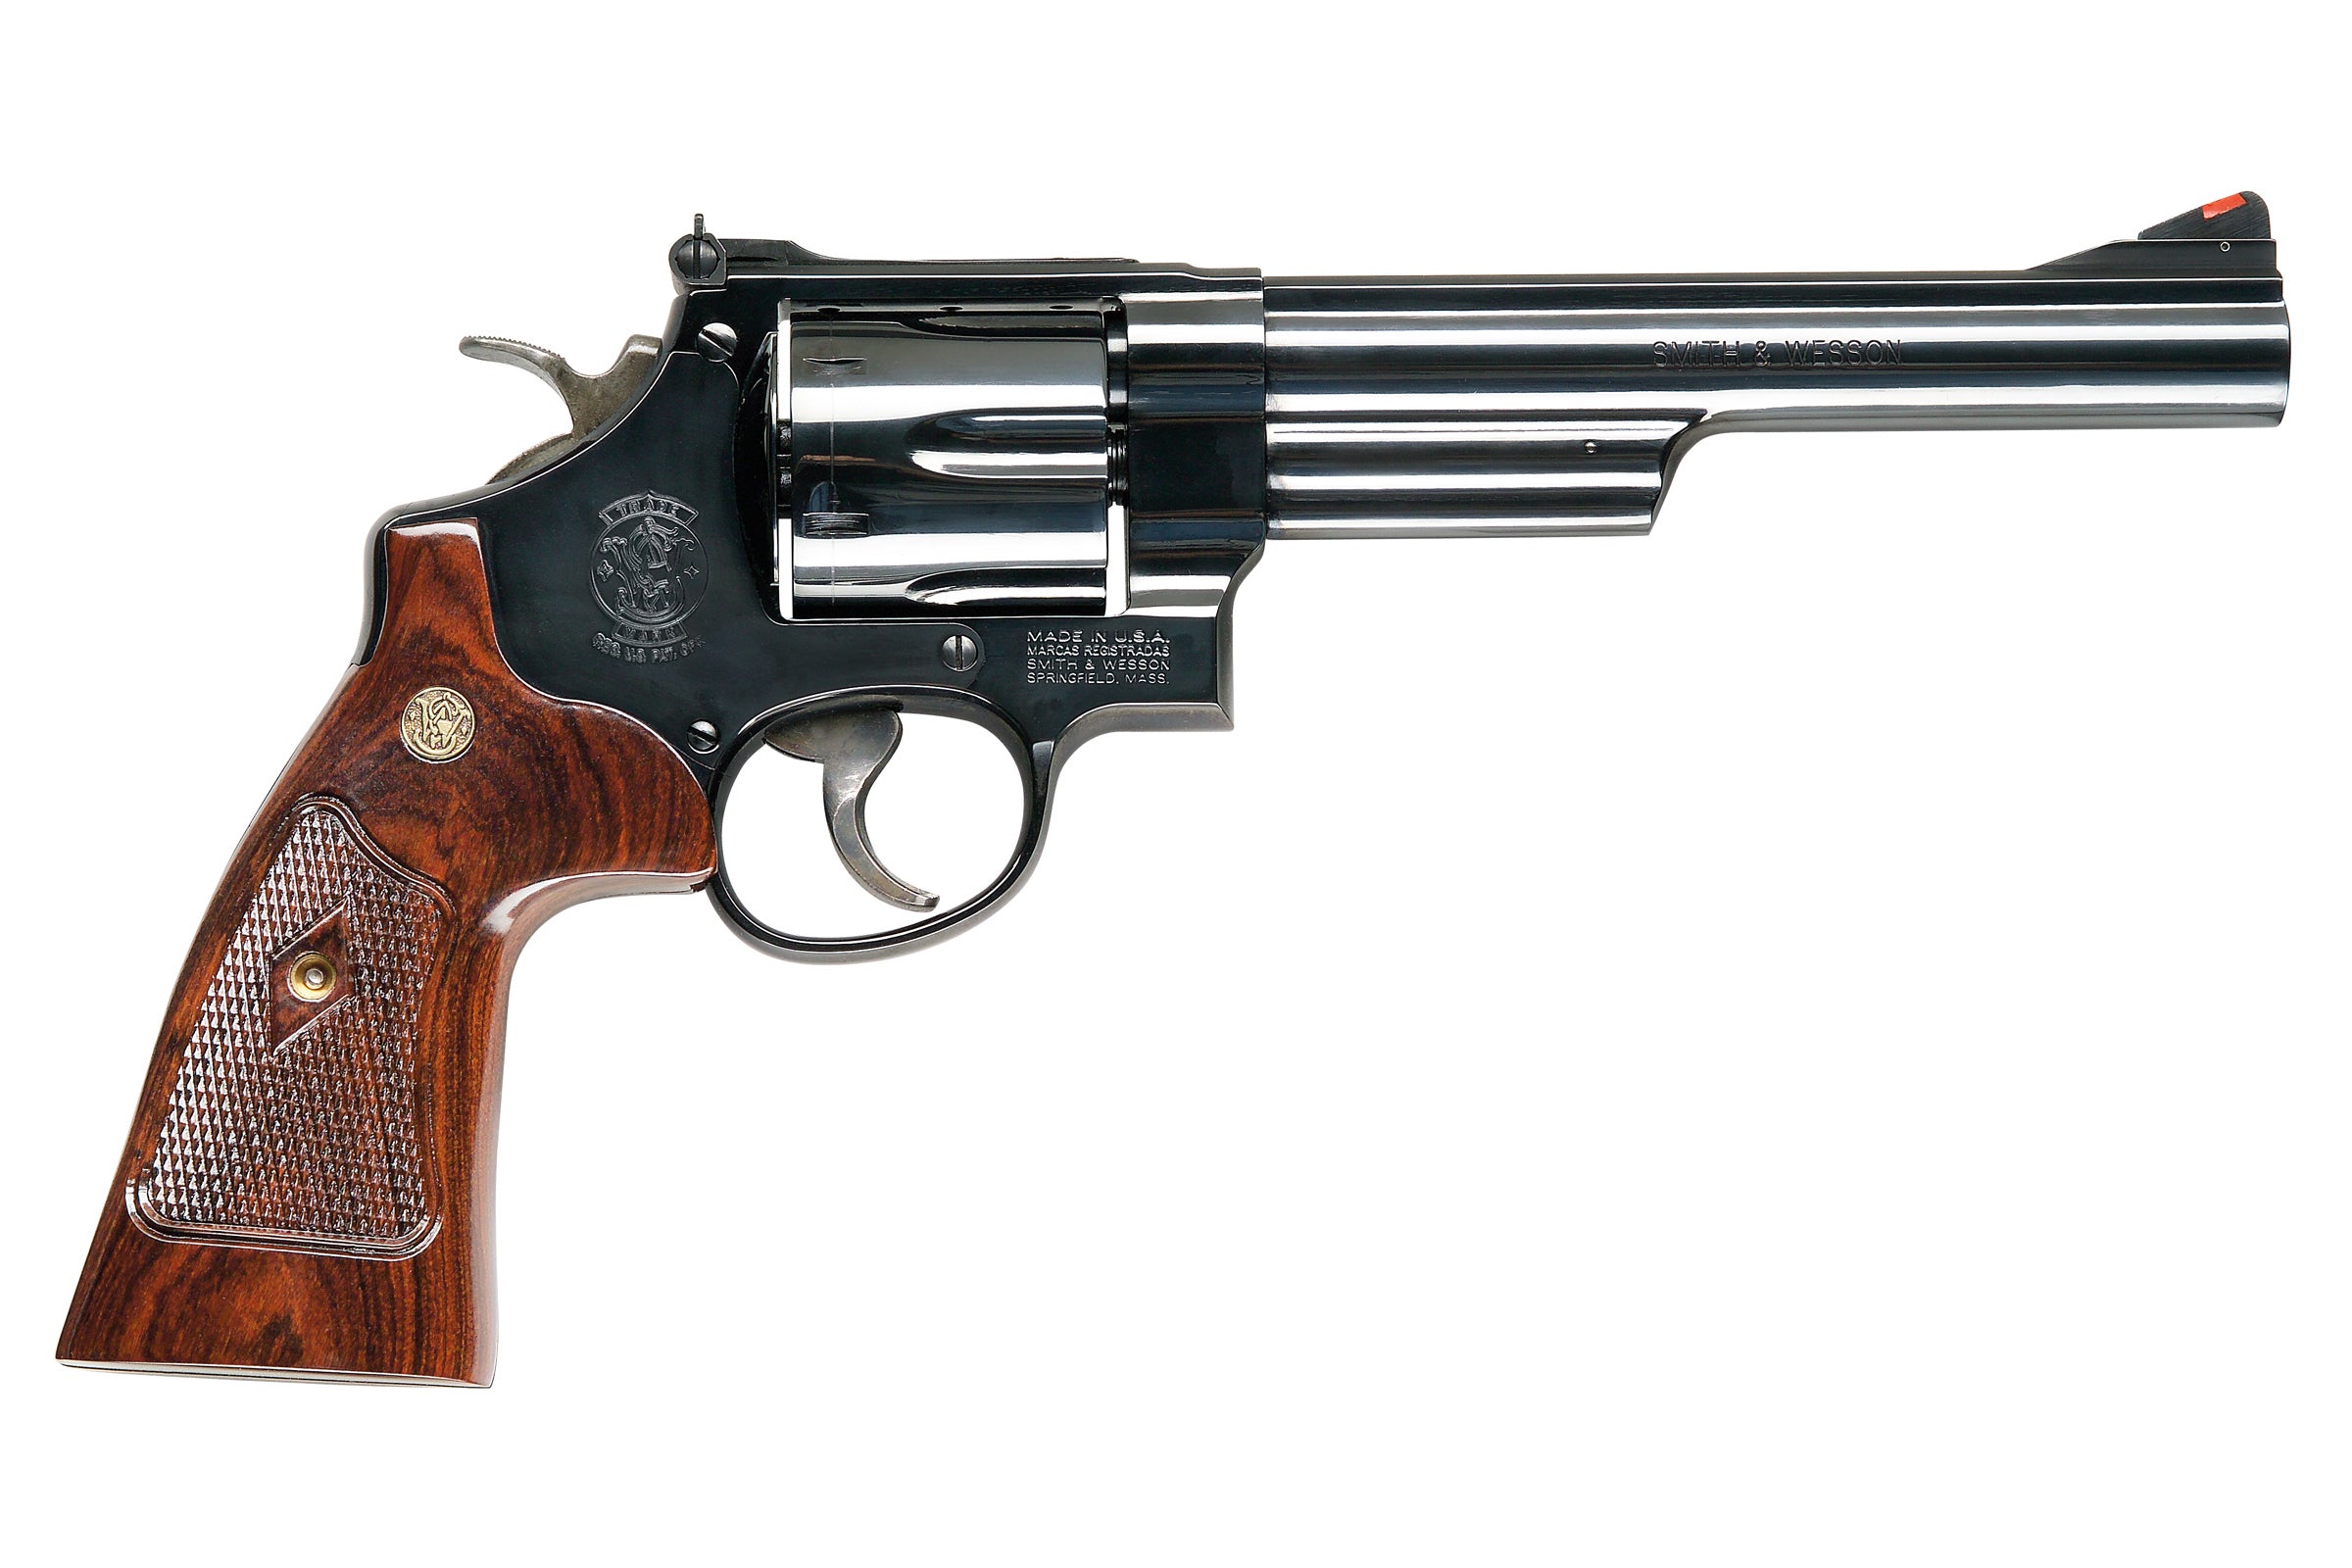 The 10 Most Powerful Handguns in the World | Field & Stream